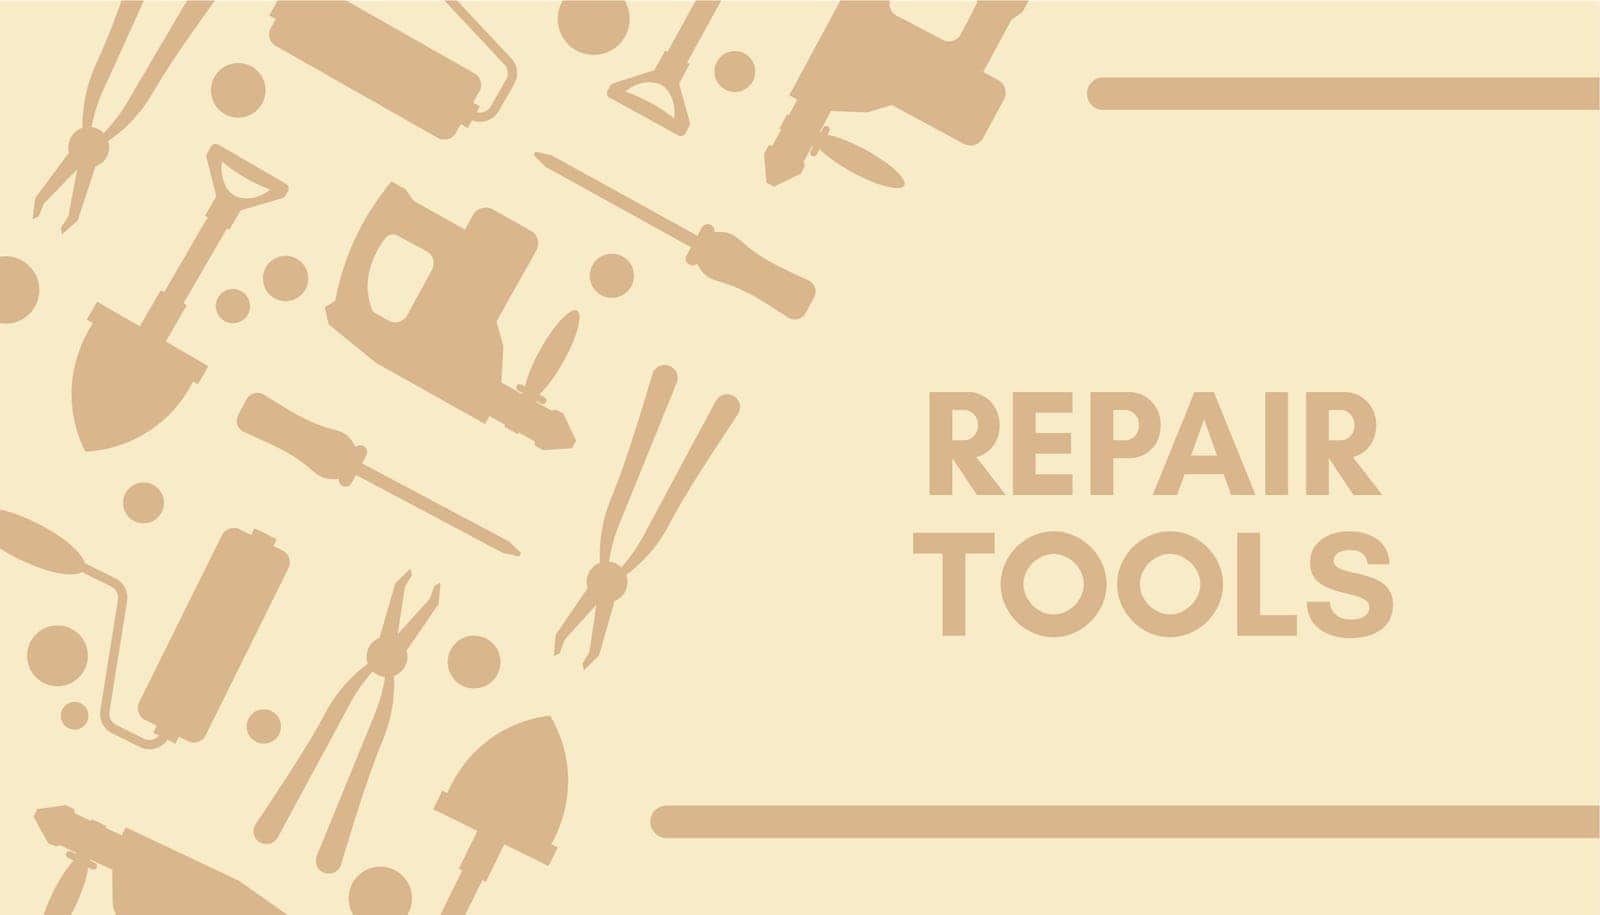 Instruments and repairing tools, fixing and maintenance. Handyman services. Gardening and carpentry, shovel and electronic appliances, drill and tongs. Banner vector in flat style illustration